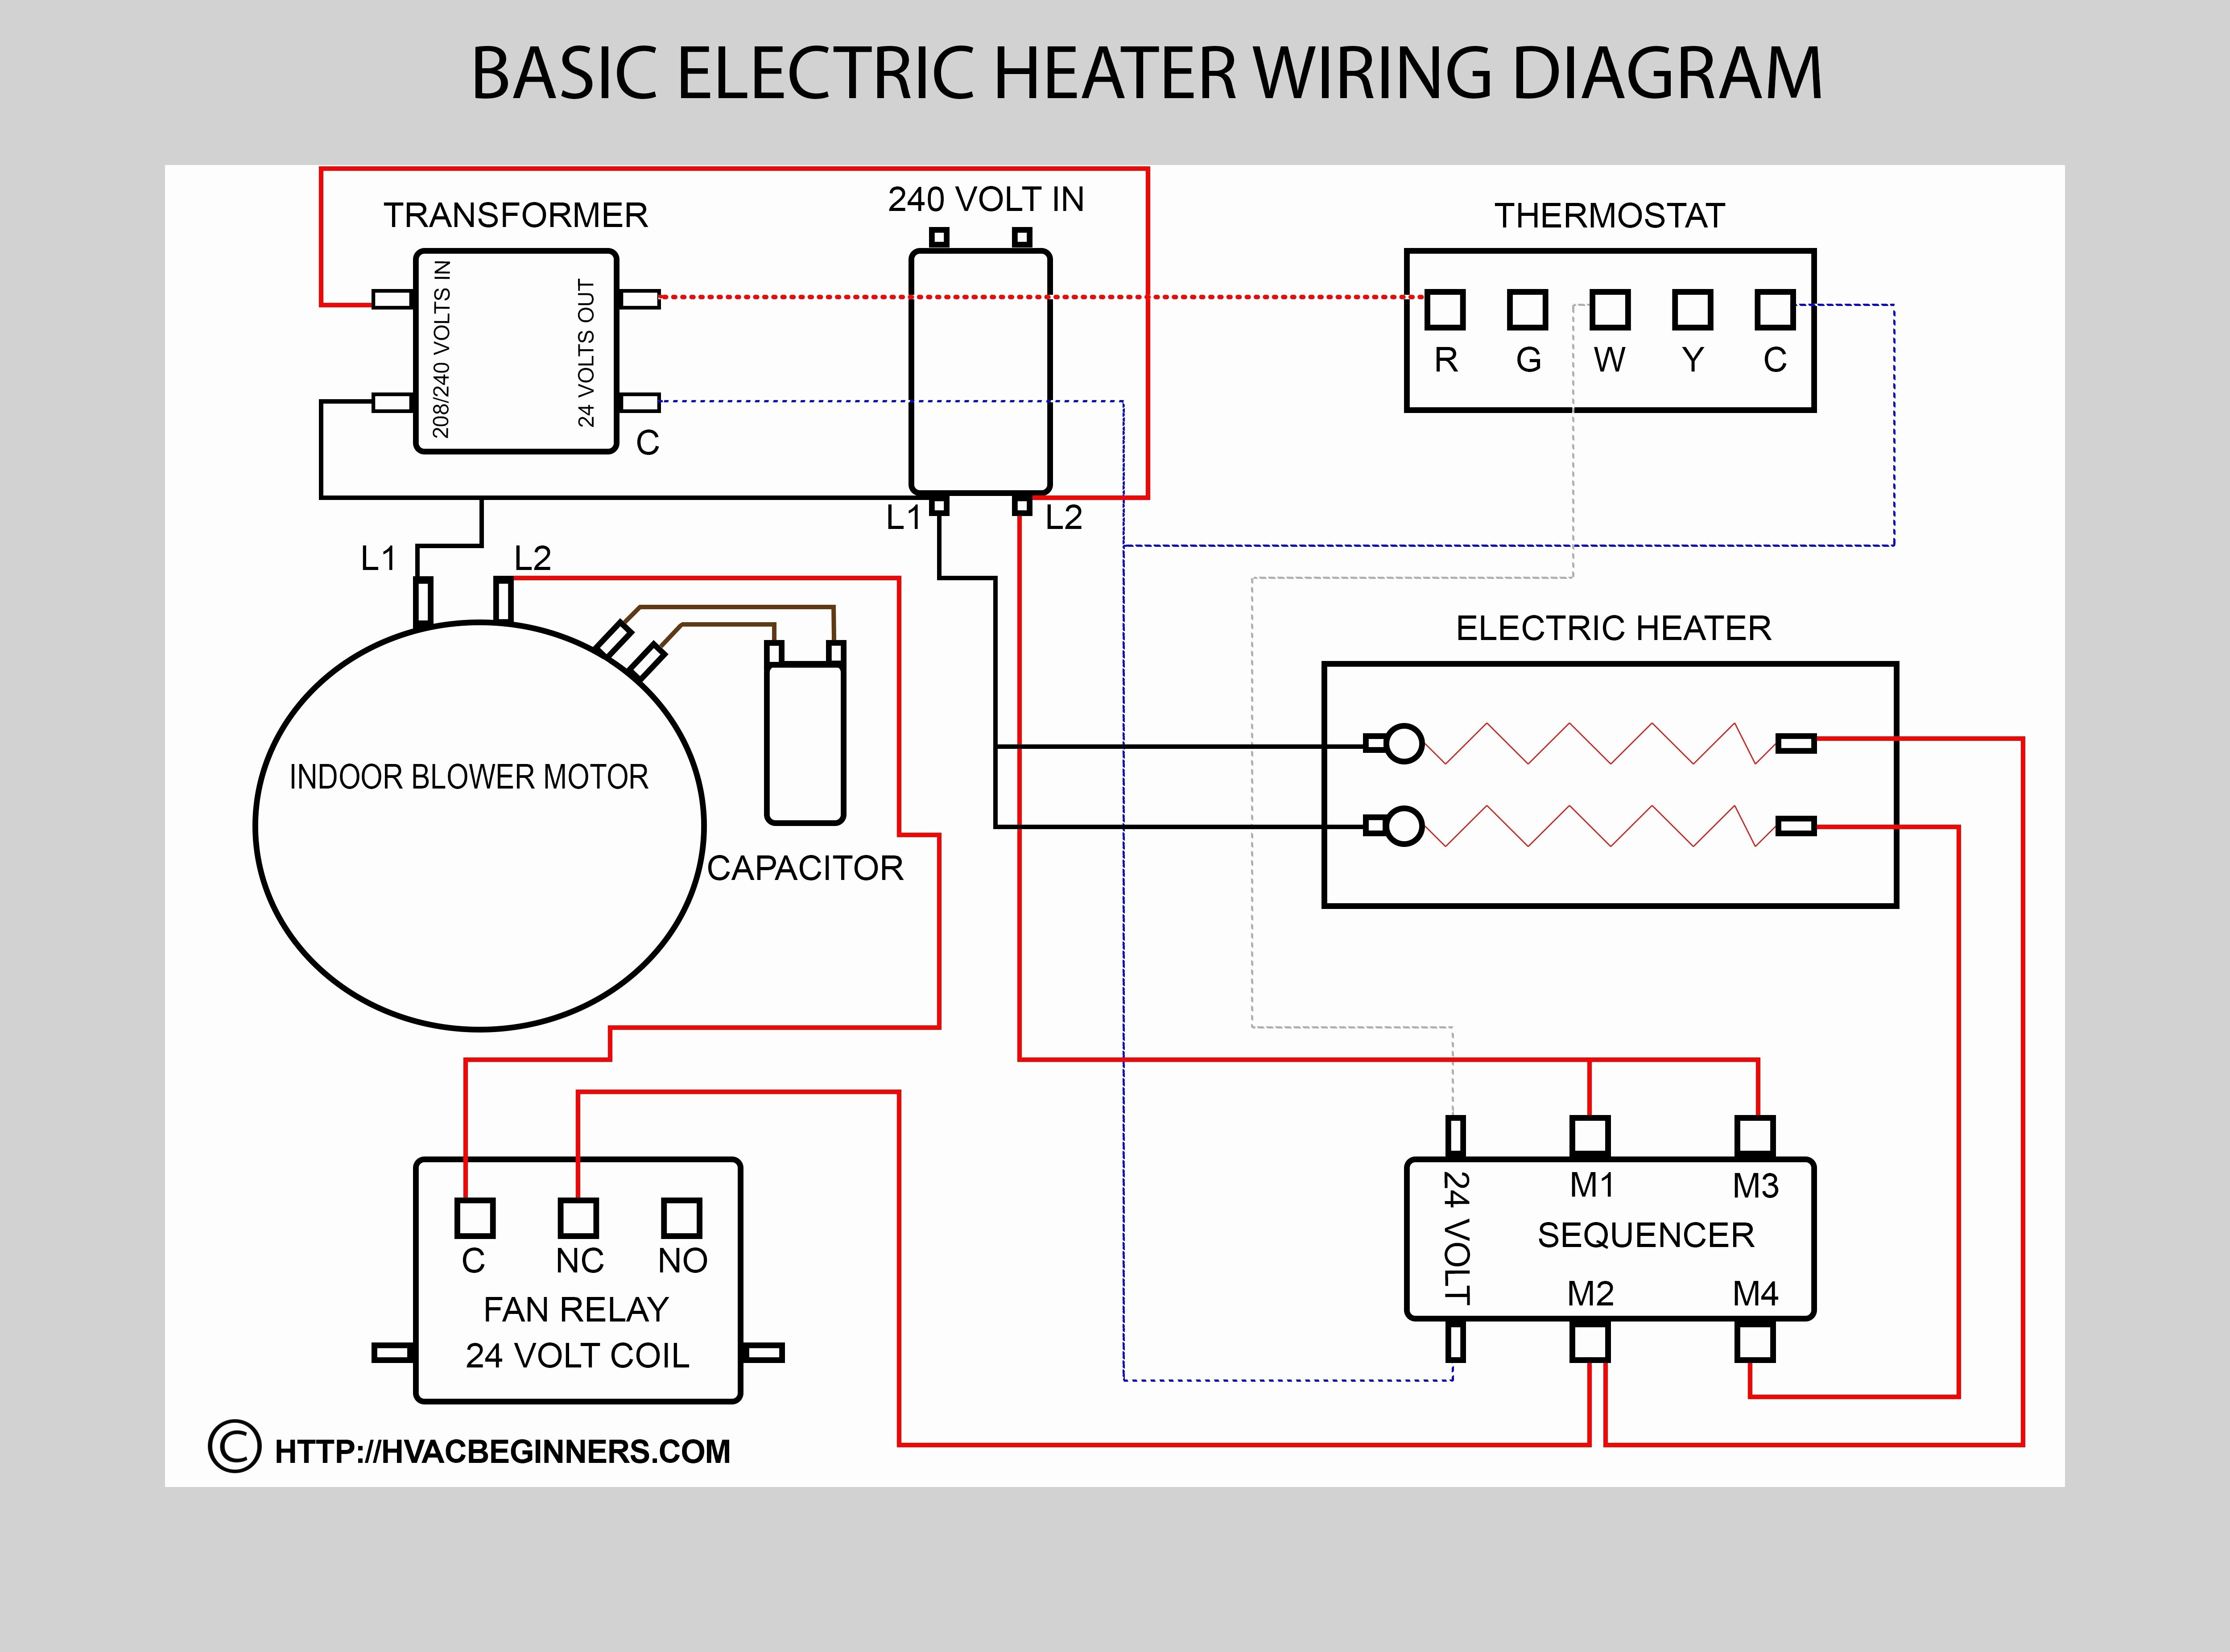 Whole House Wiring Diagram whole Home Wiring Diagram Best Panel Wiring Diagram New Best Wiring Of Whole House Wiring Diagram